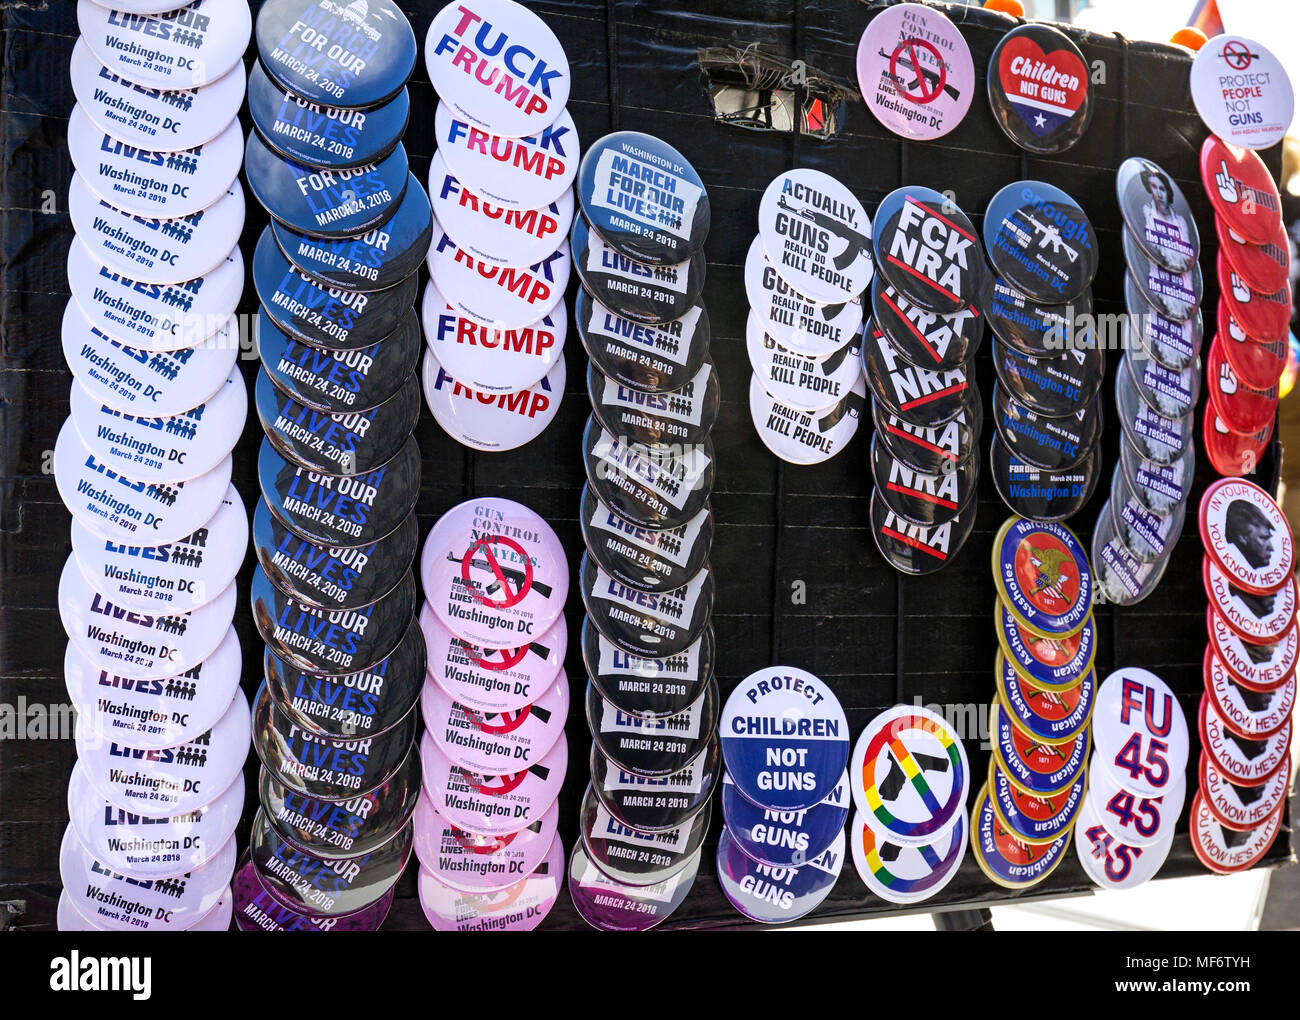 March For Our Lives badges on sale during the rally against gun violence on March 24, 2018 in Washington, DC, USA Stock Photo